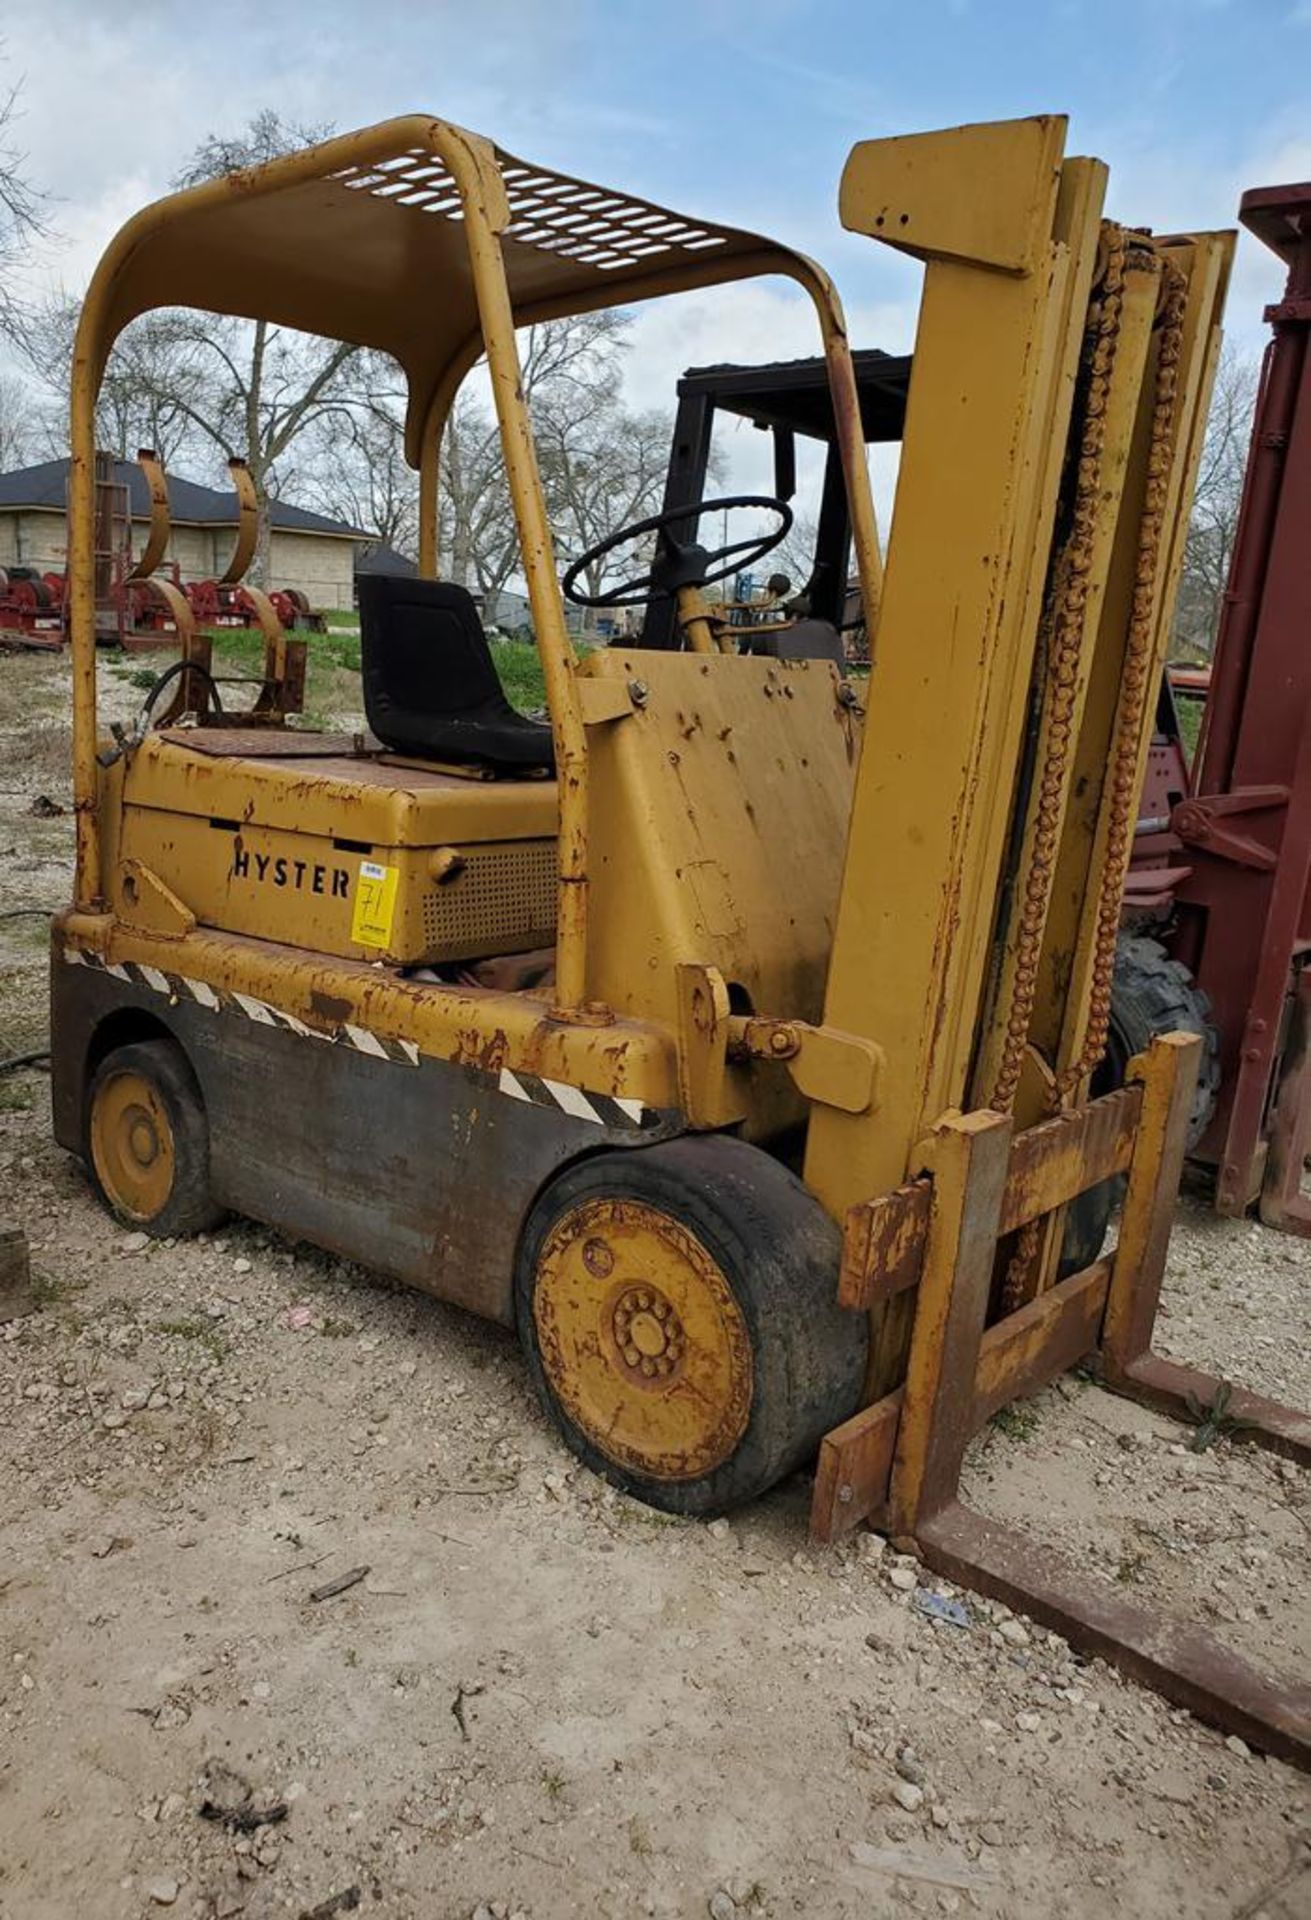 HYSTER LPG FORKLIFT; 2-STAGE MAST (NEED TRANSMISSION REPAIRS)